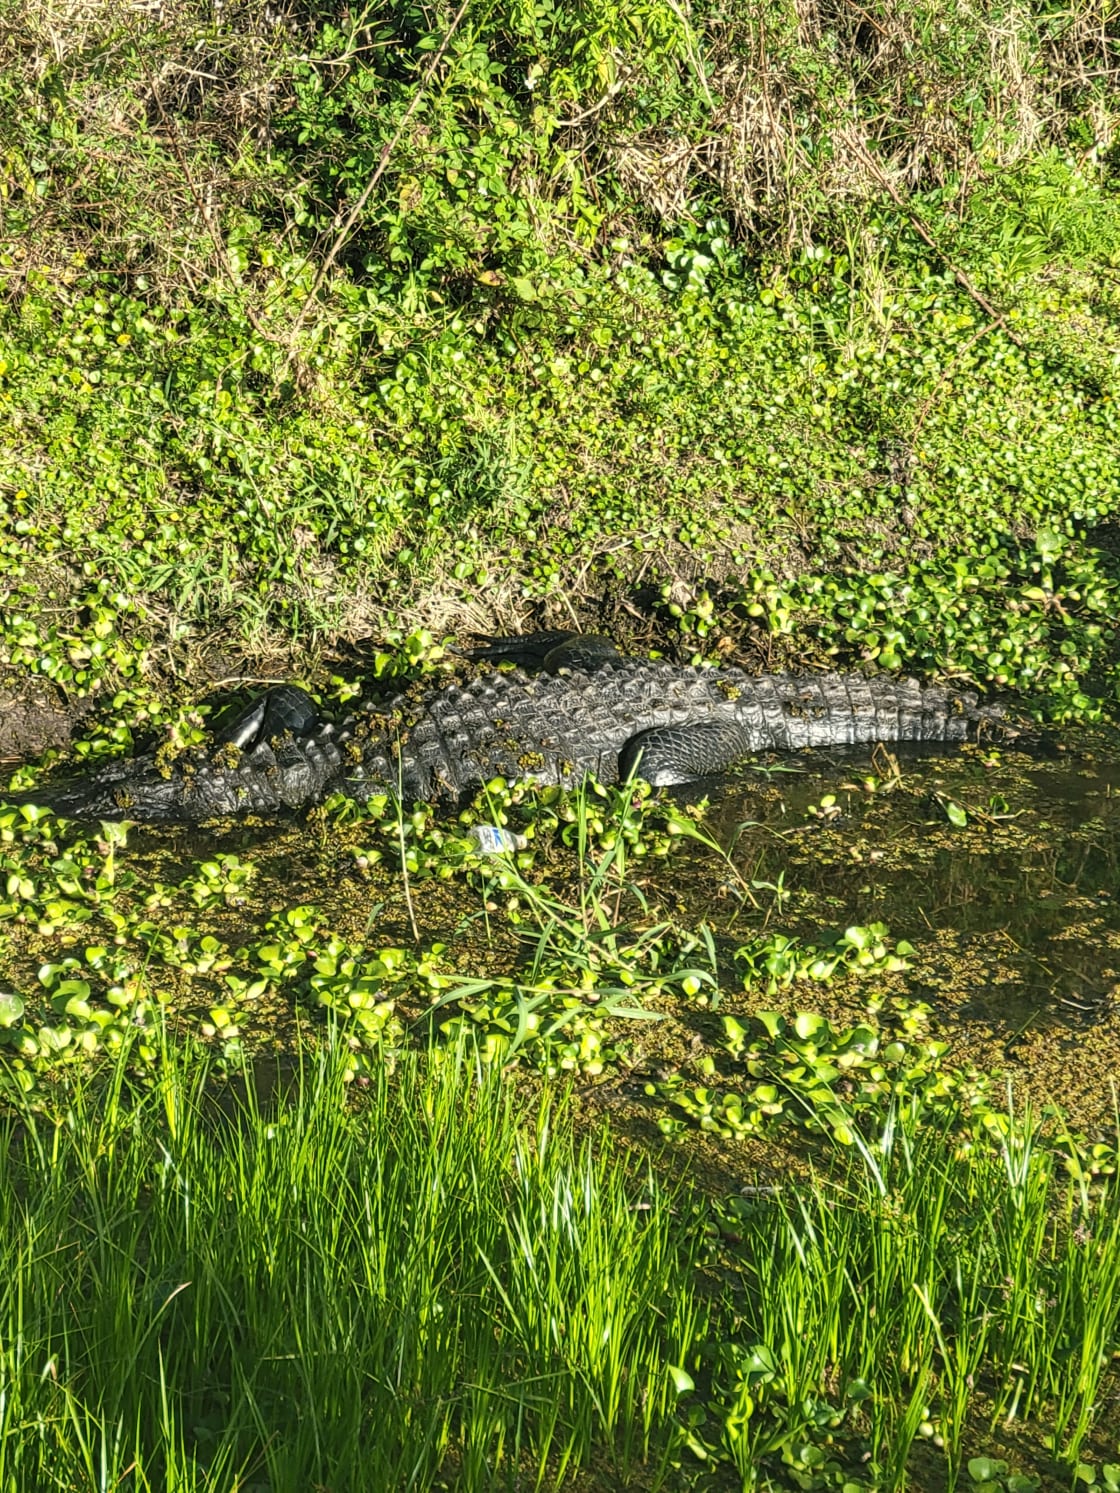 An alligator we saw in a canal with low water. It was not on the property, but just off the grounds. 